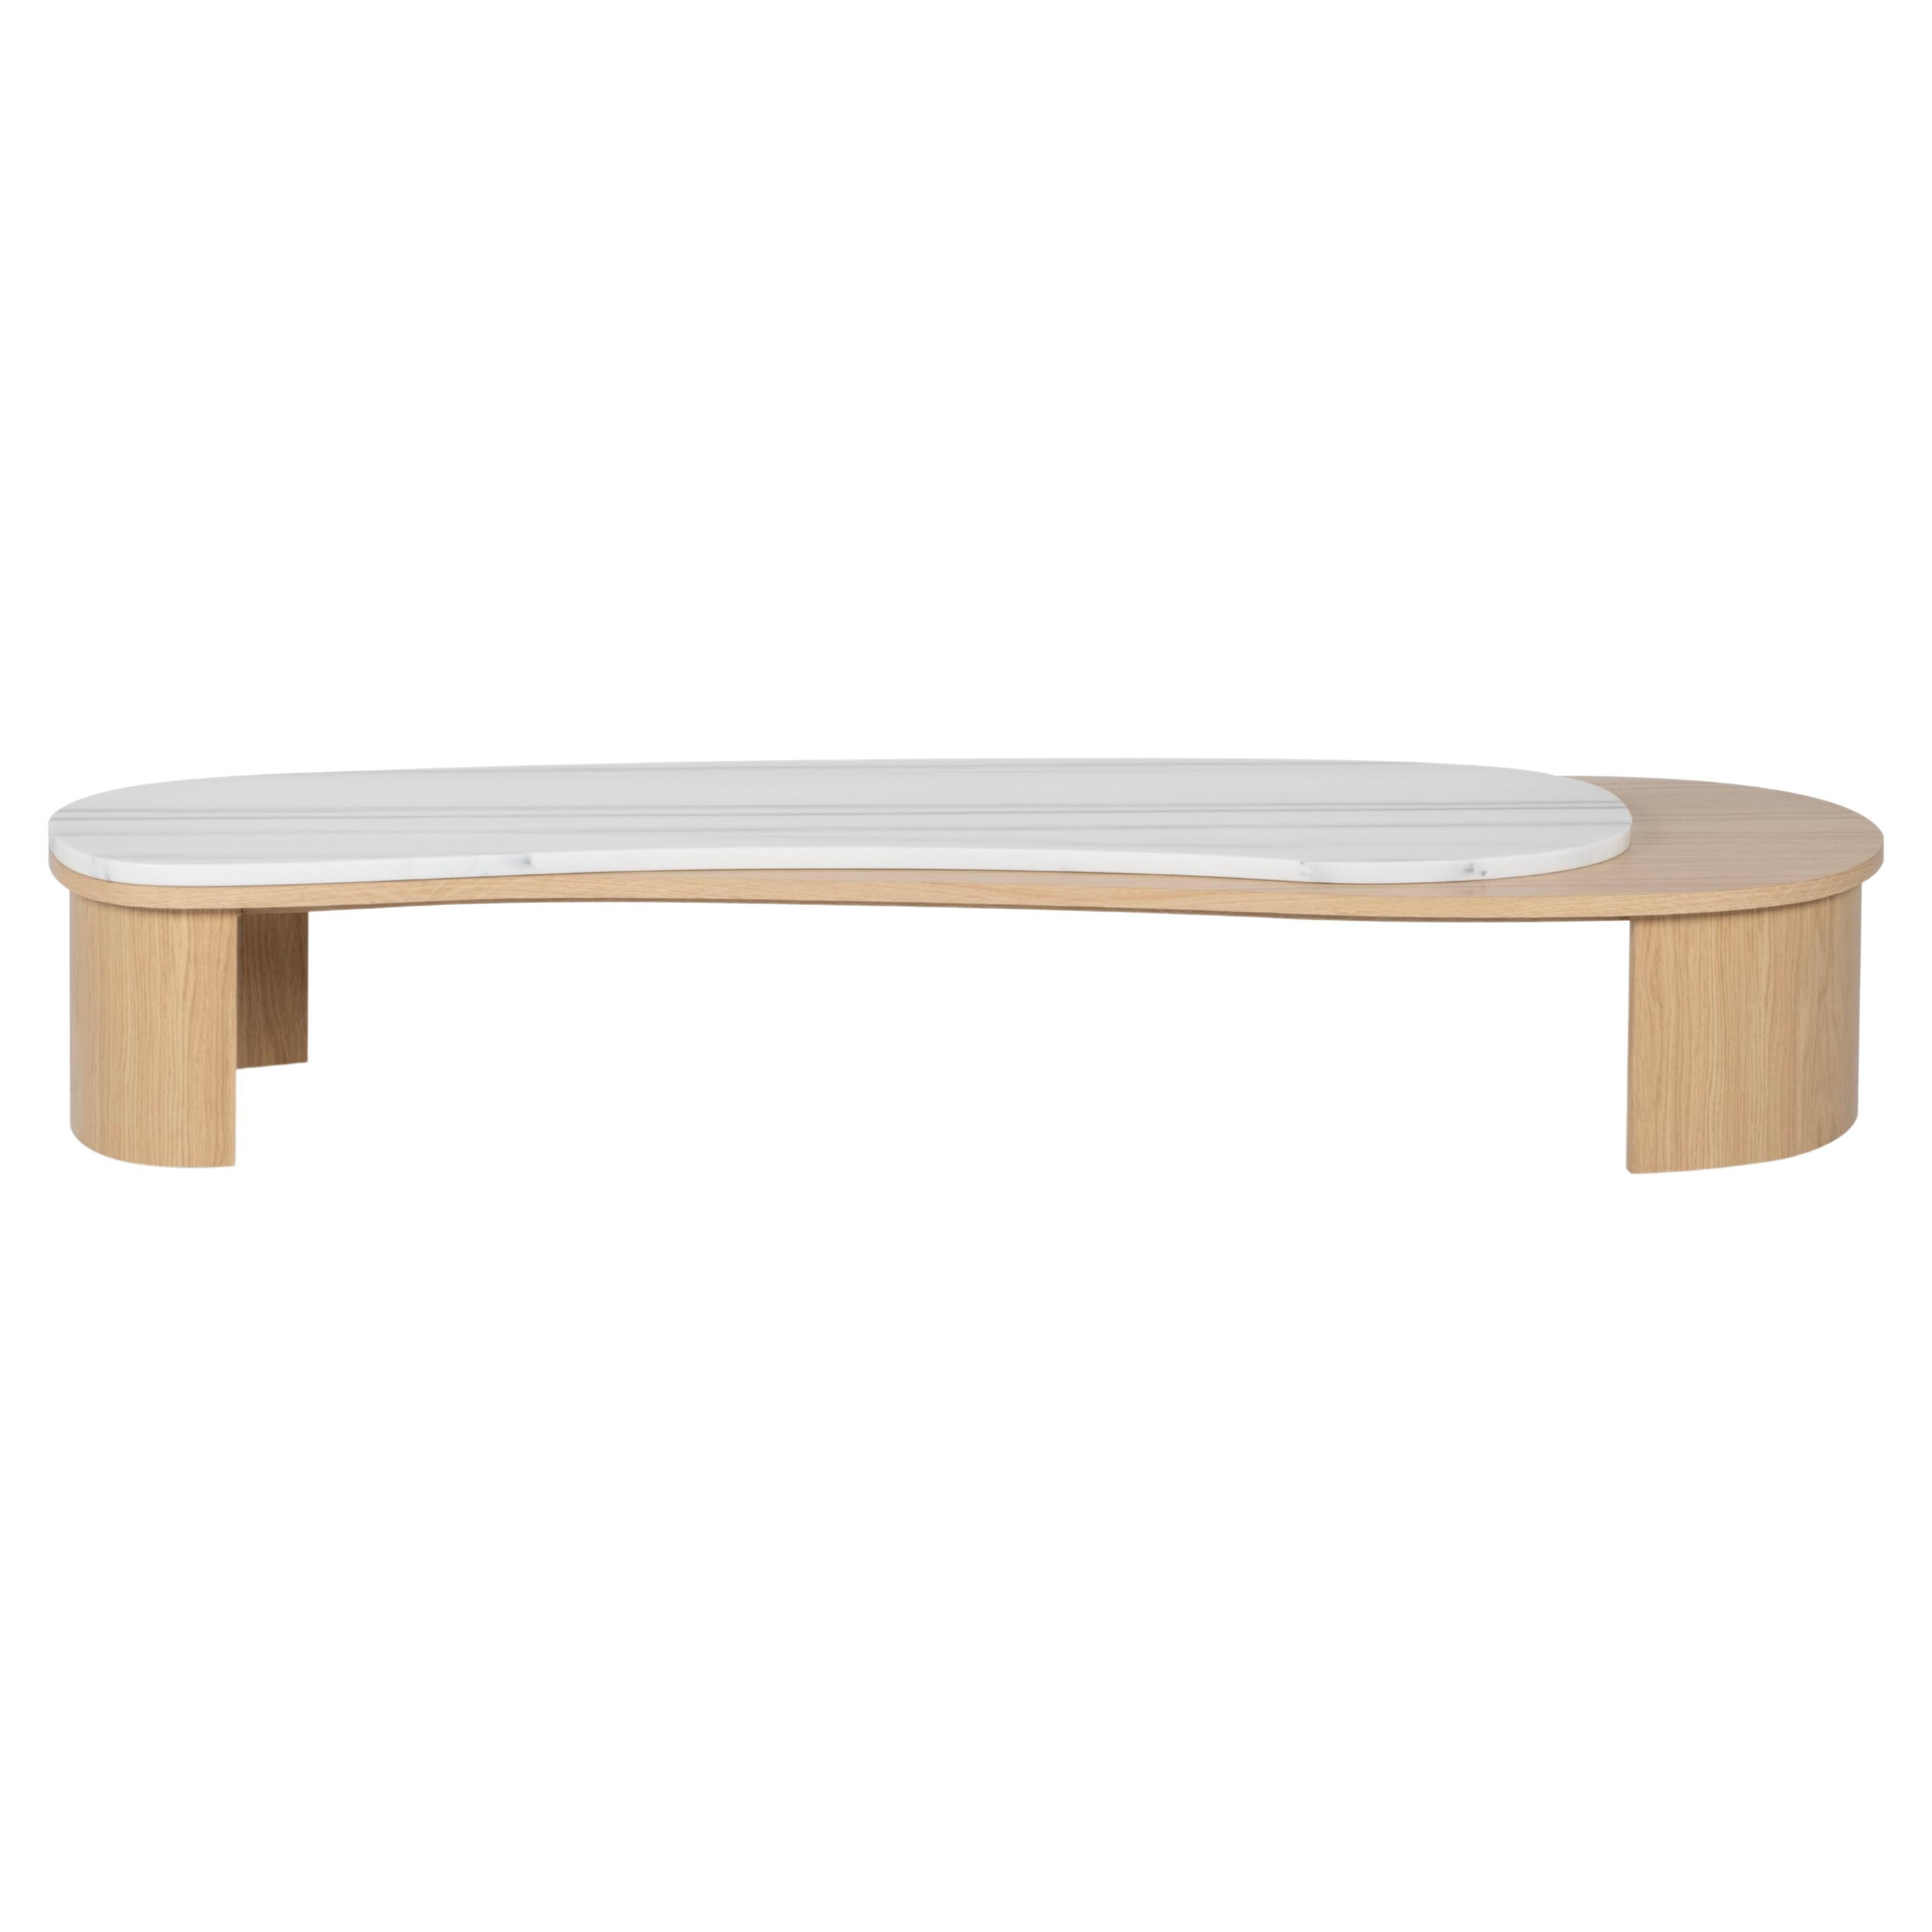 Armona coffee table, Contemporary Collection, Handcrafted in Portugal - Europe by Greenapple.

Designed by Rute Martins for the Contemporary Collection, the Armona modern coffee table pays homage to the natural beauty and organic lines of Armona